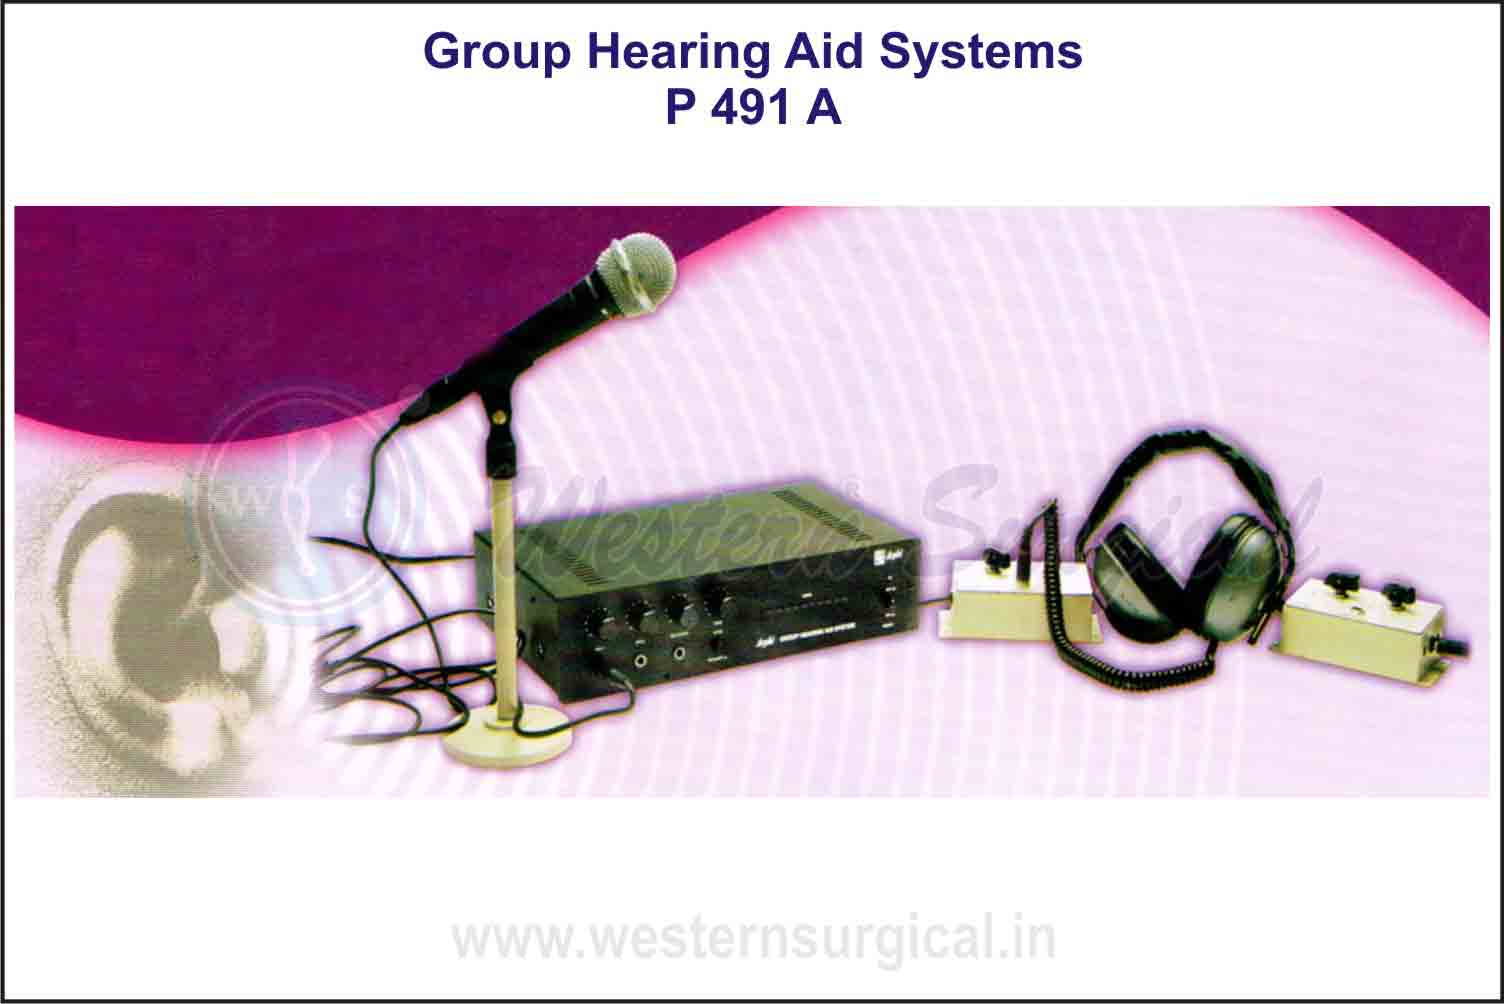 GROUP HEARING AID SYSTEMS  FOR DEAF-TRAINING INSTITUTIONS